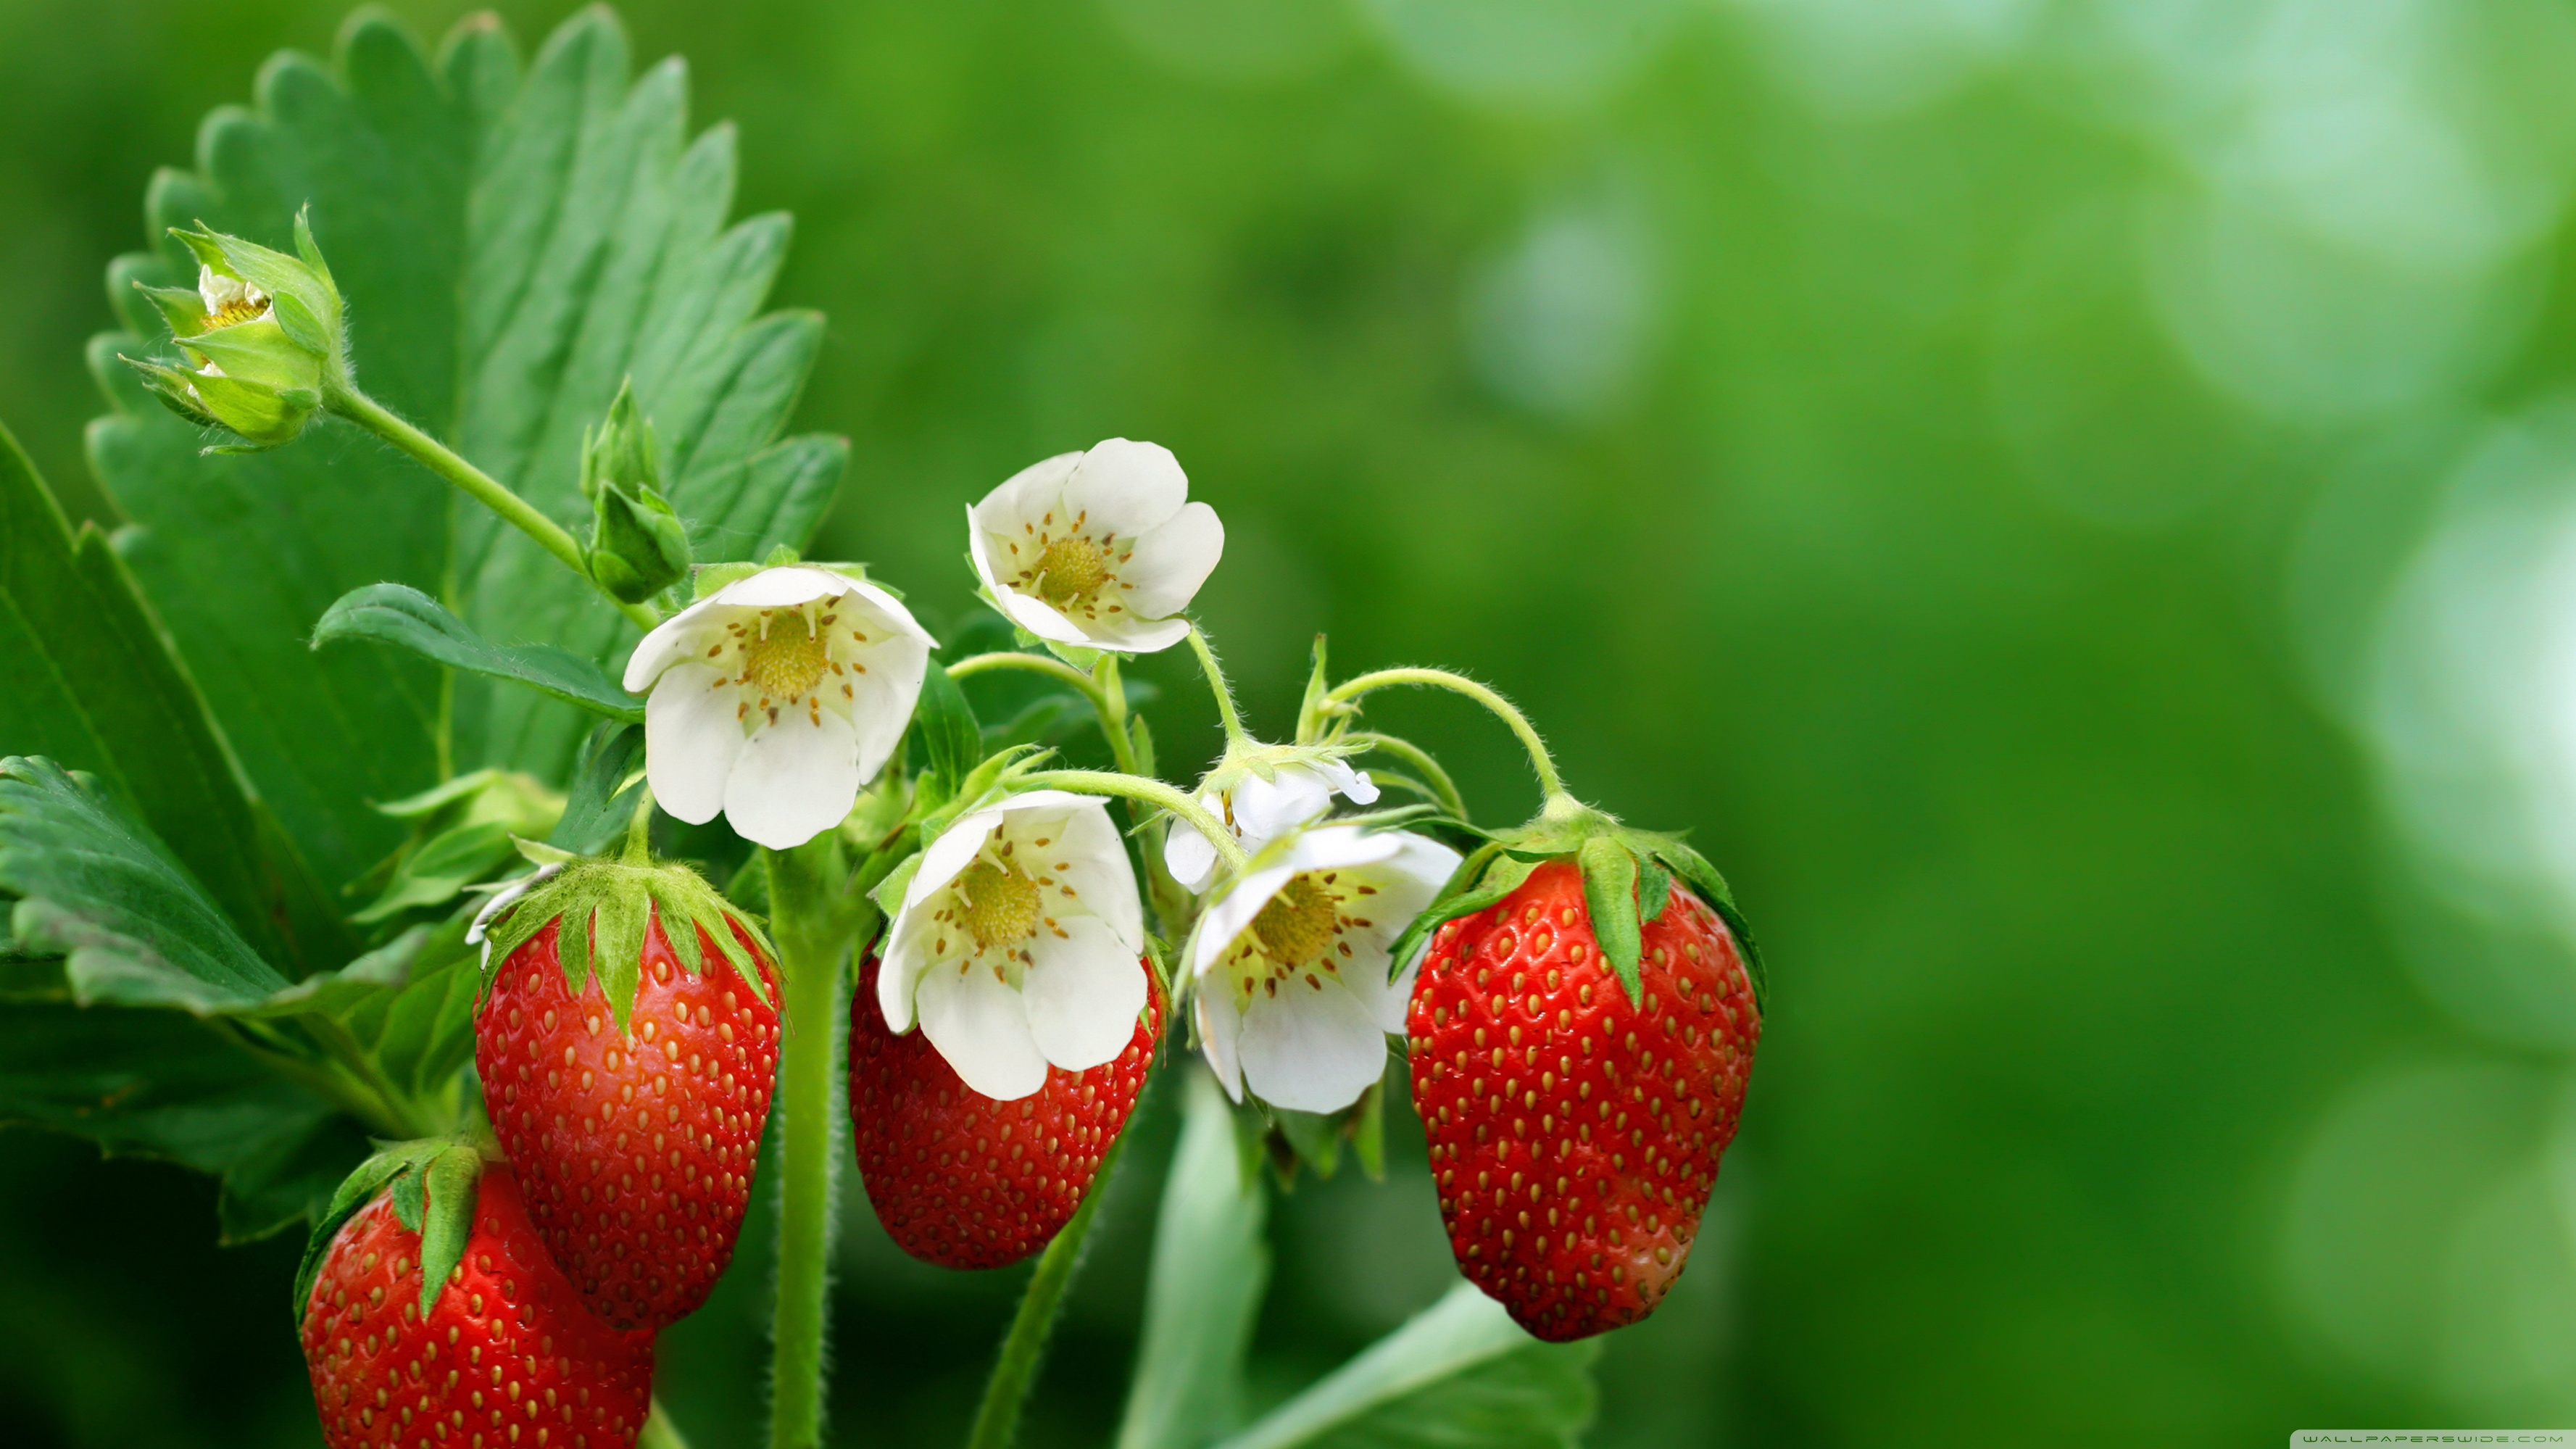 Strawberry Plant with Flowers and Fruits ❤ 4K HD Desktop Wallpaper